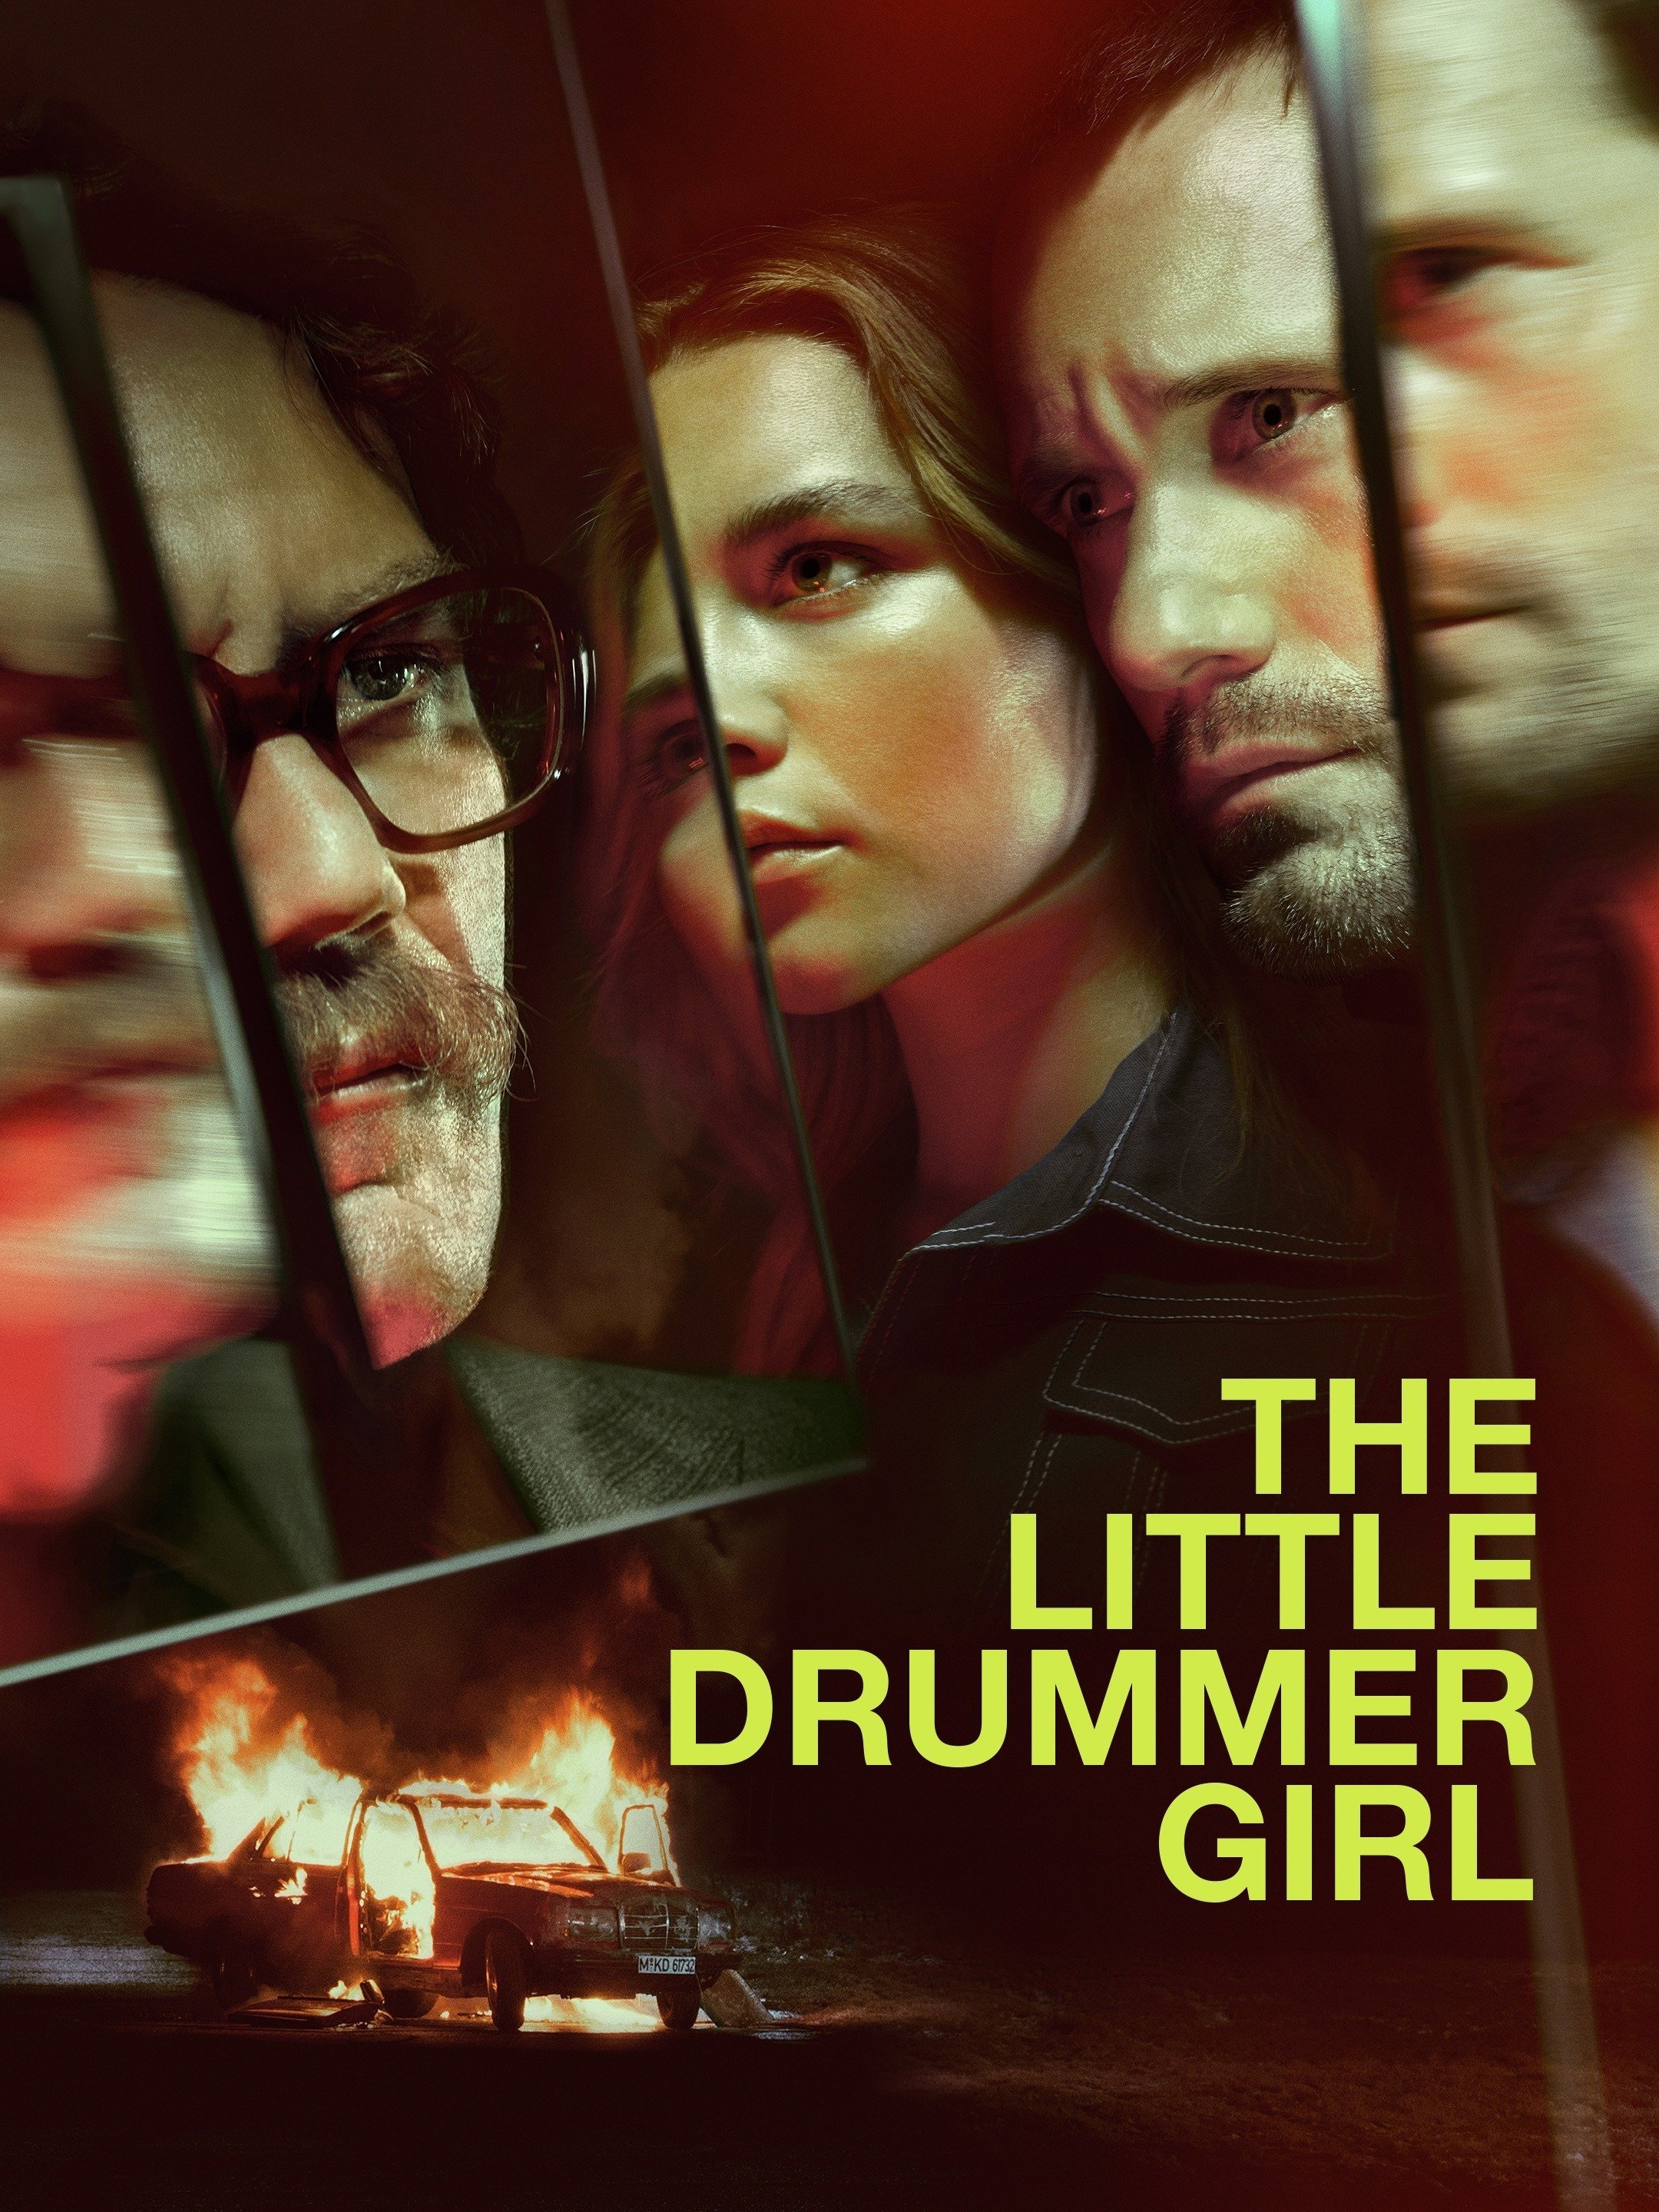 Litle Boy And Girl Sex - The Little Drummer Girl - Rotten Tomatoes